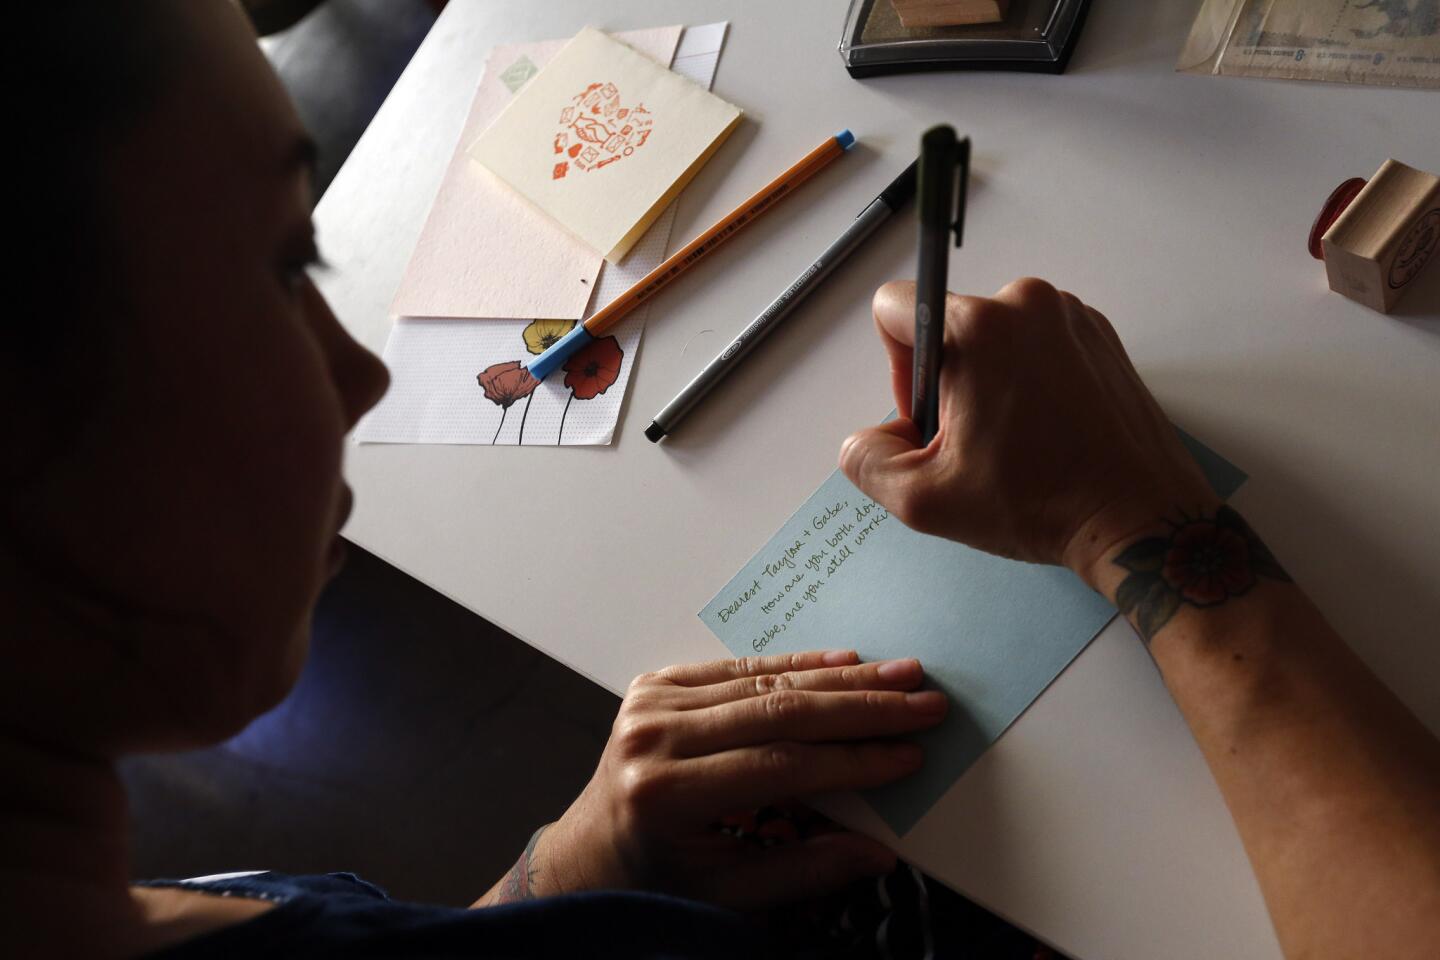 Erika Mulan writes a letter to a pen pal in Atlanta during the monthly gathering of the L.A. Pen Pal Club at Paper Pastries Atelier in downtown Los Angeles.